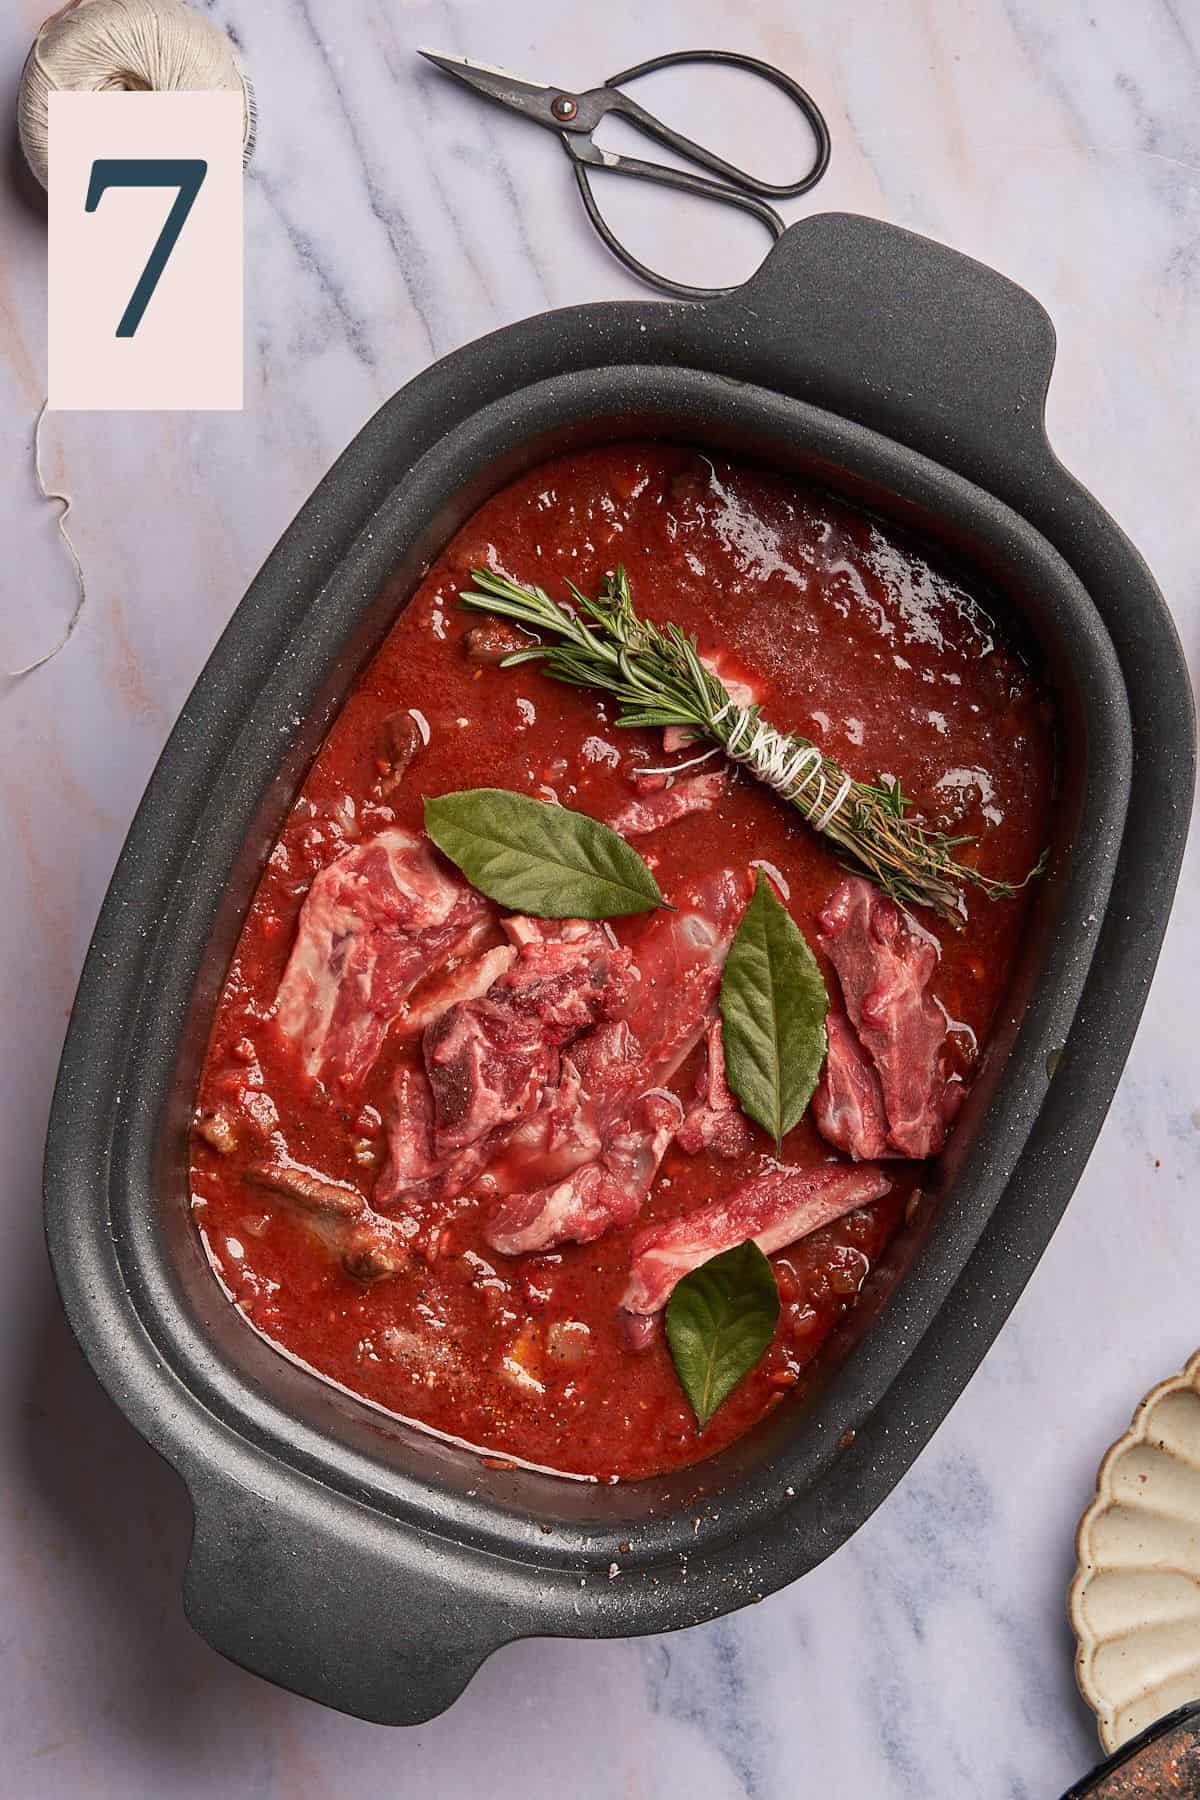 hearty and rich tomato sauce with lamb bones, bay leaves, and fresh herbs in a bundle secured with twine in a slow cooker. 